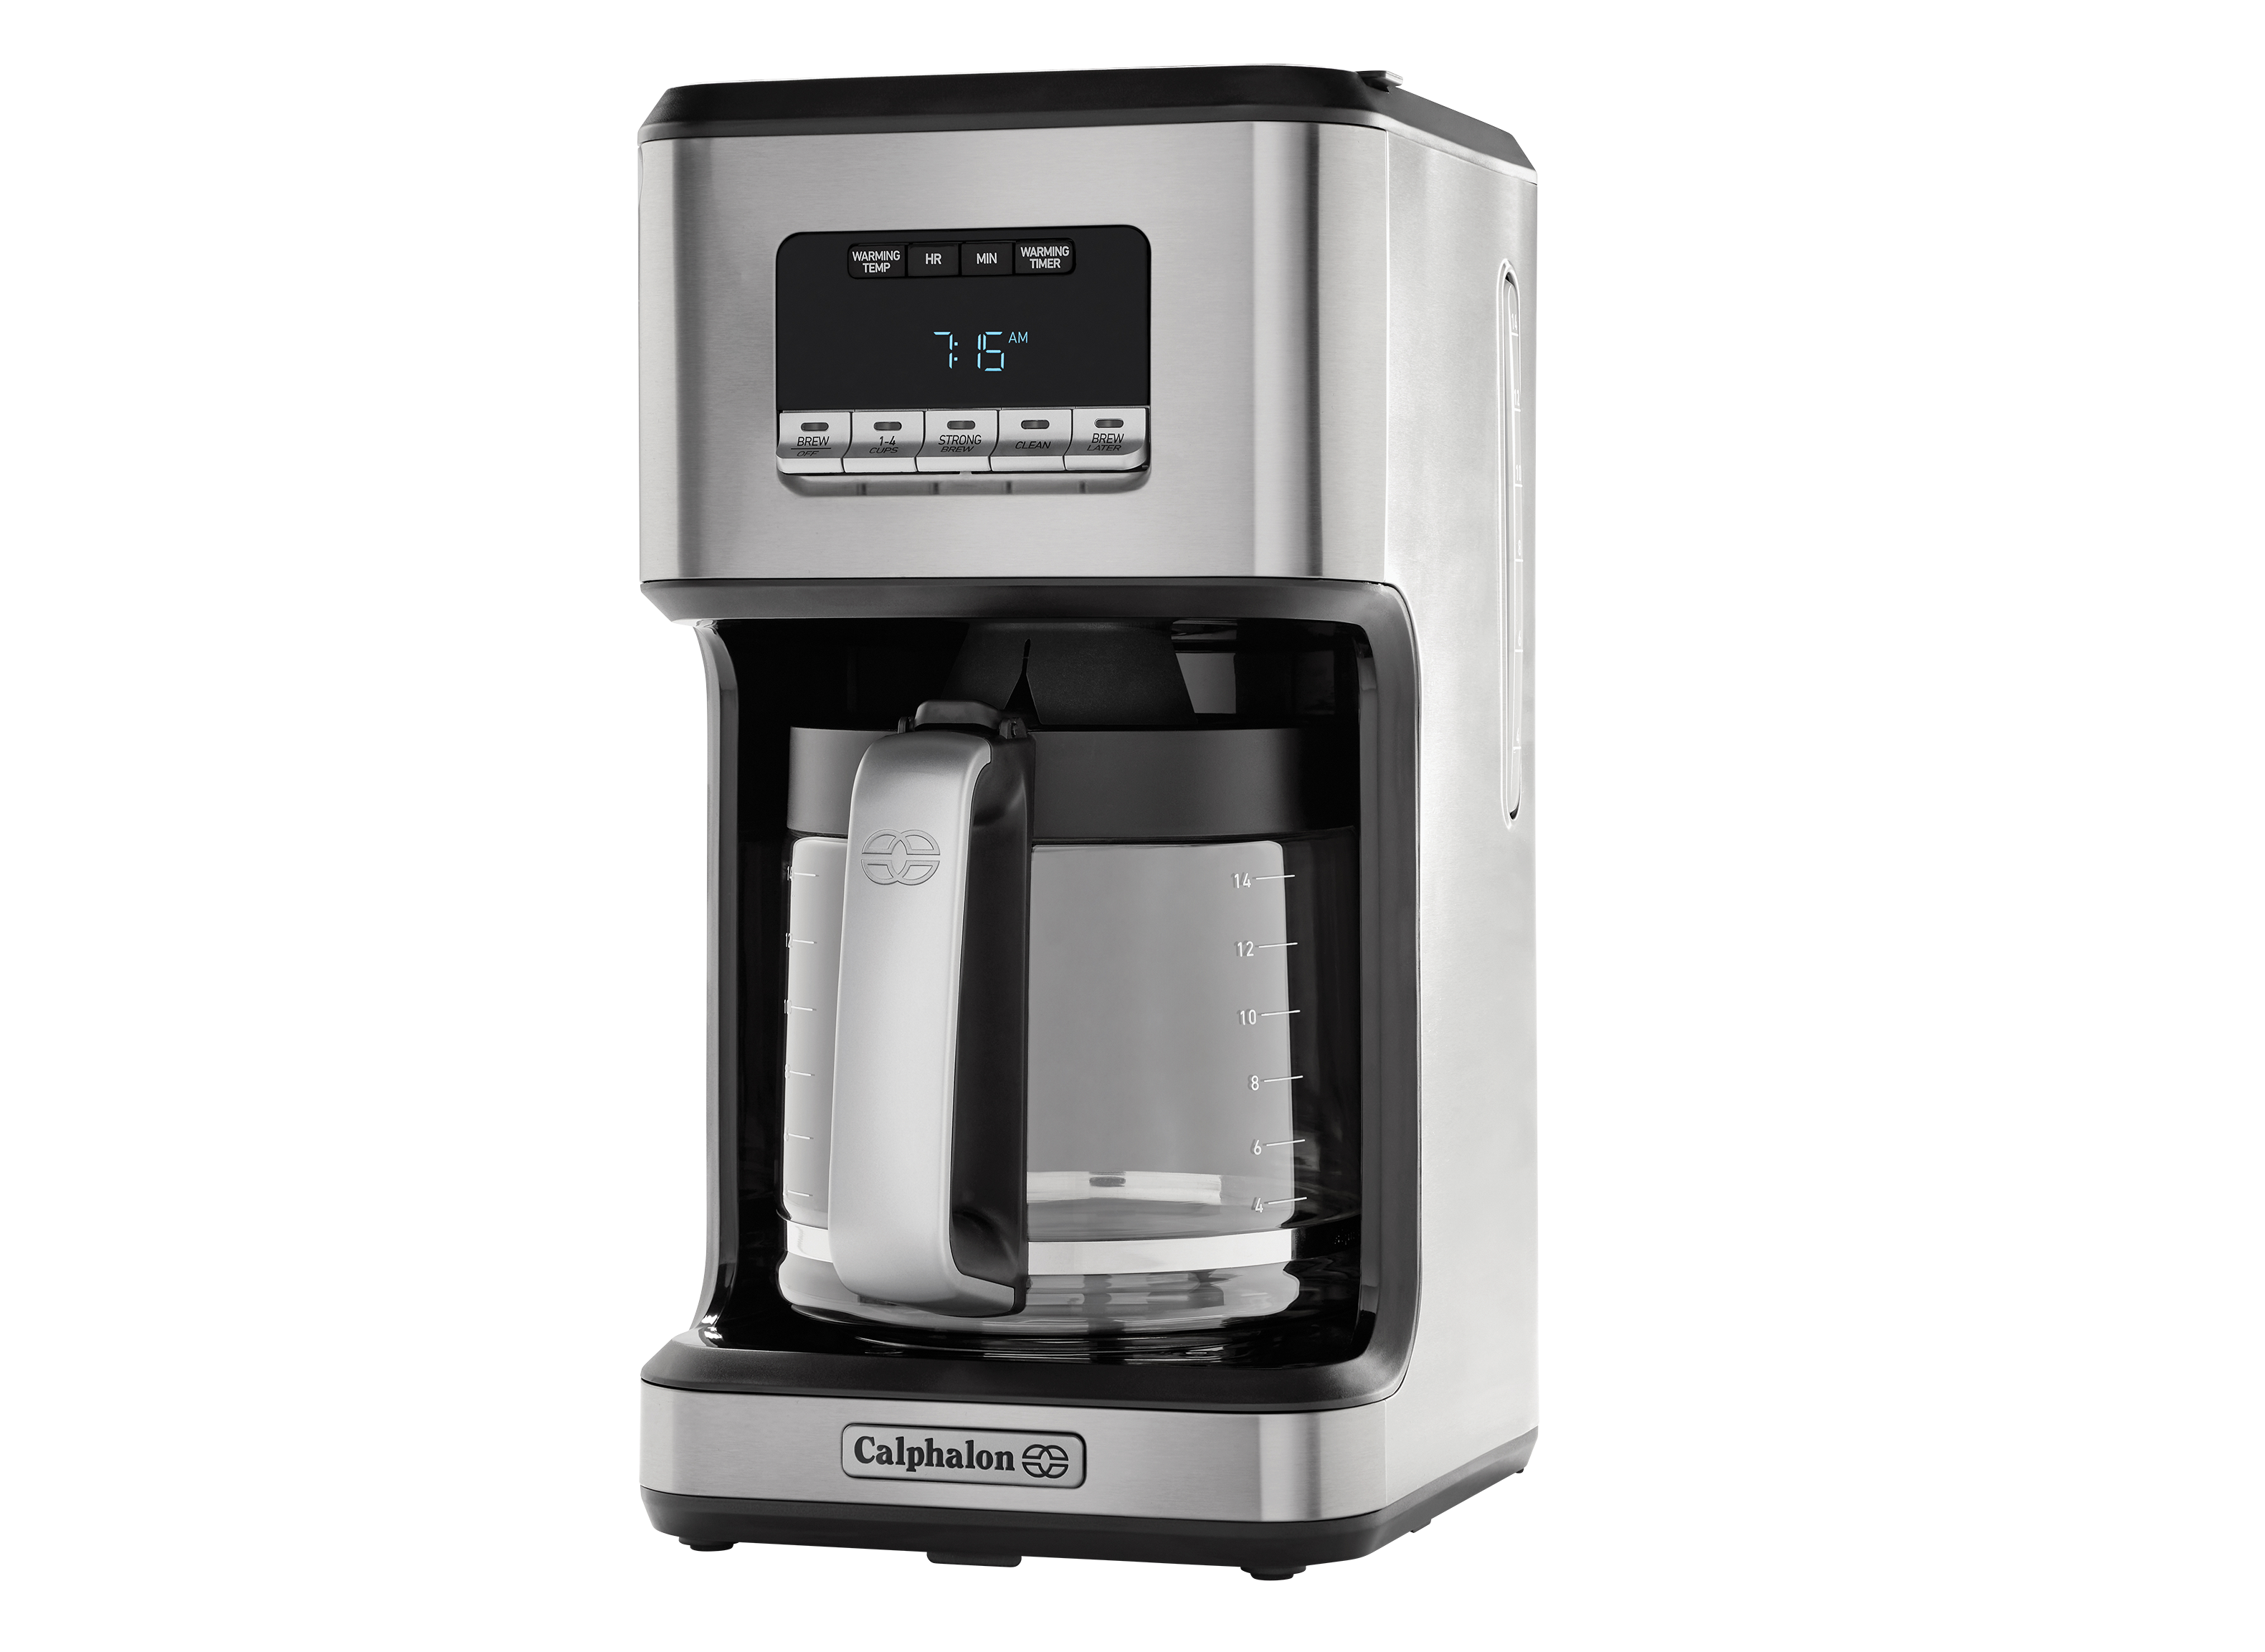 https://crdms.images.consumerreports.org/prod/products/cr/models/407671-drip-coffee-makers-with-carafe-calphalon-14-cup-programmable-10032226.png